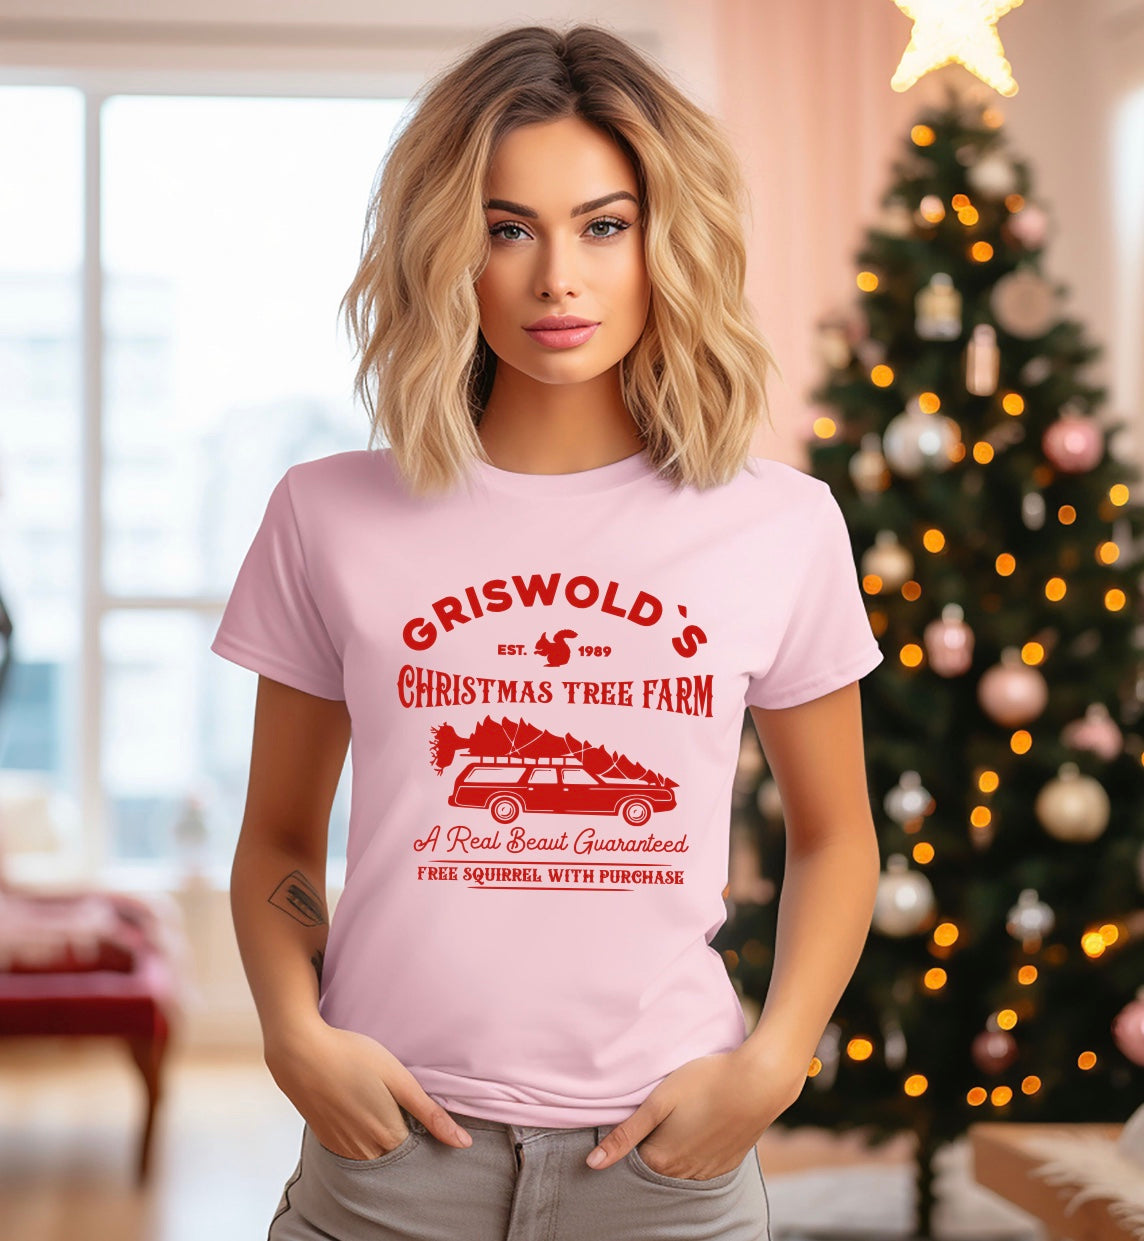 Griswold's Christmas tree farm unisex t-shirt in pink with red graphic